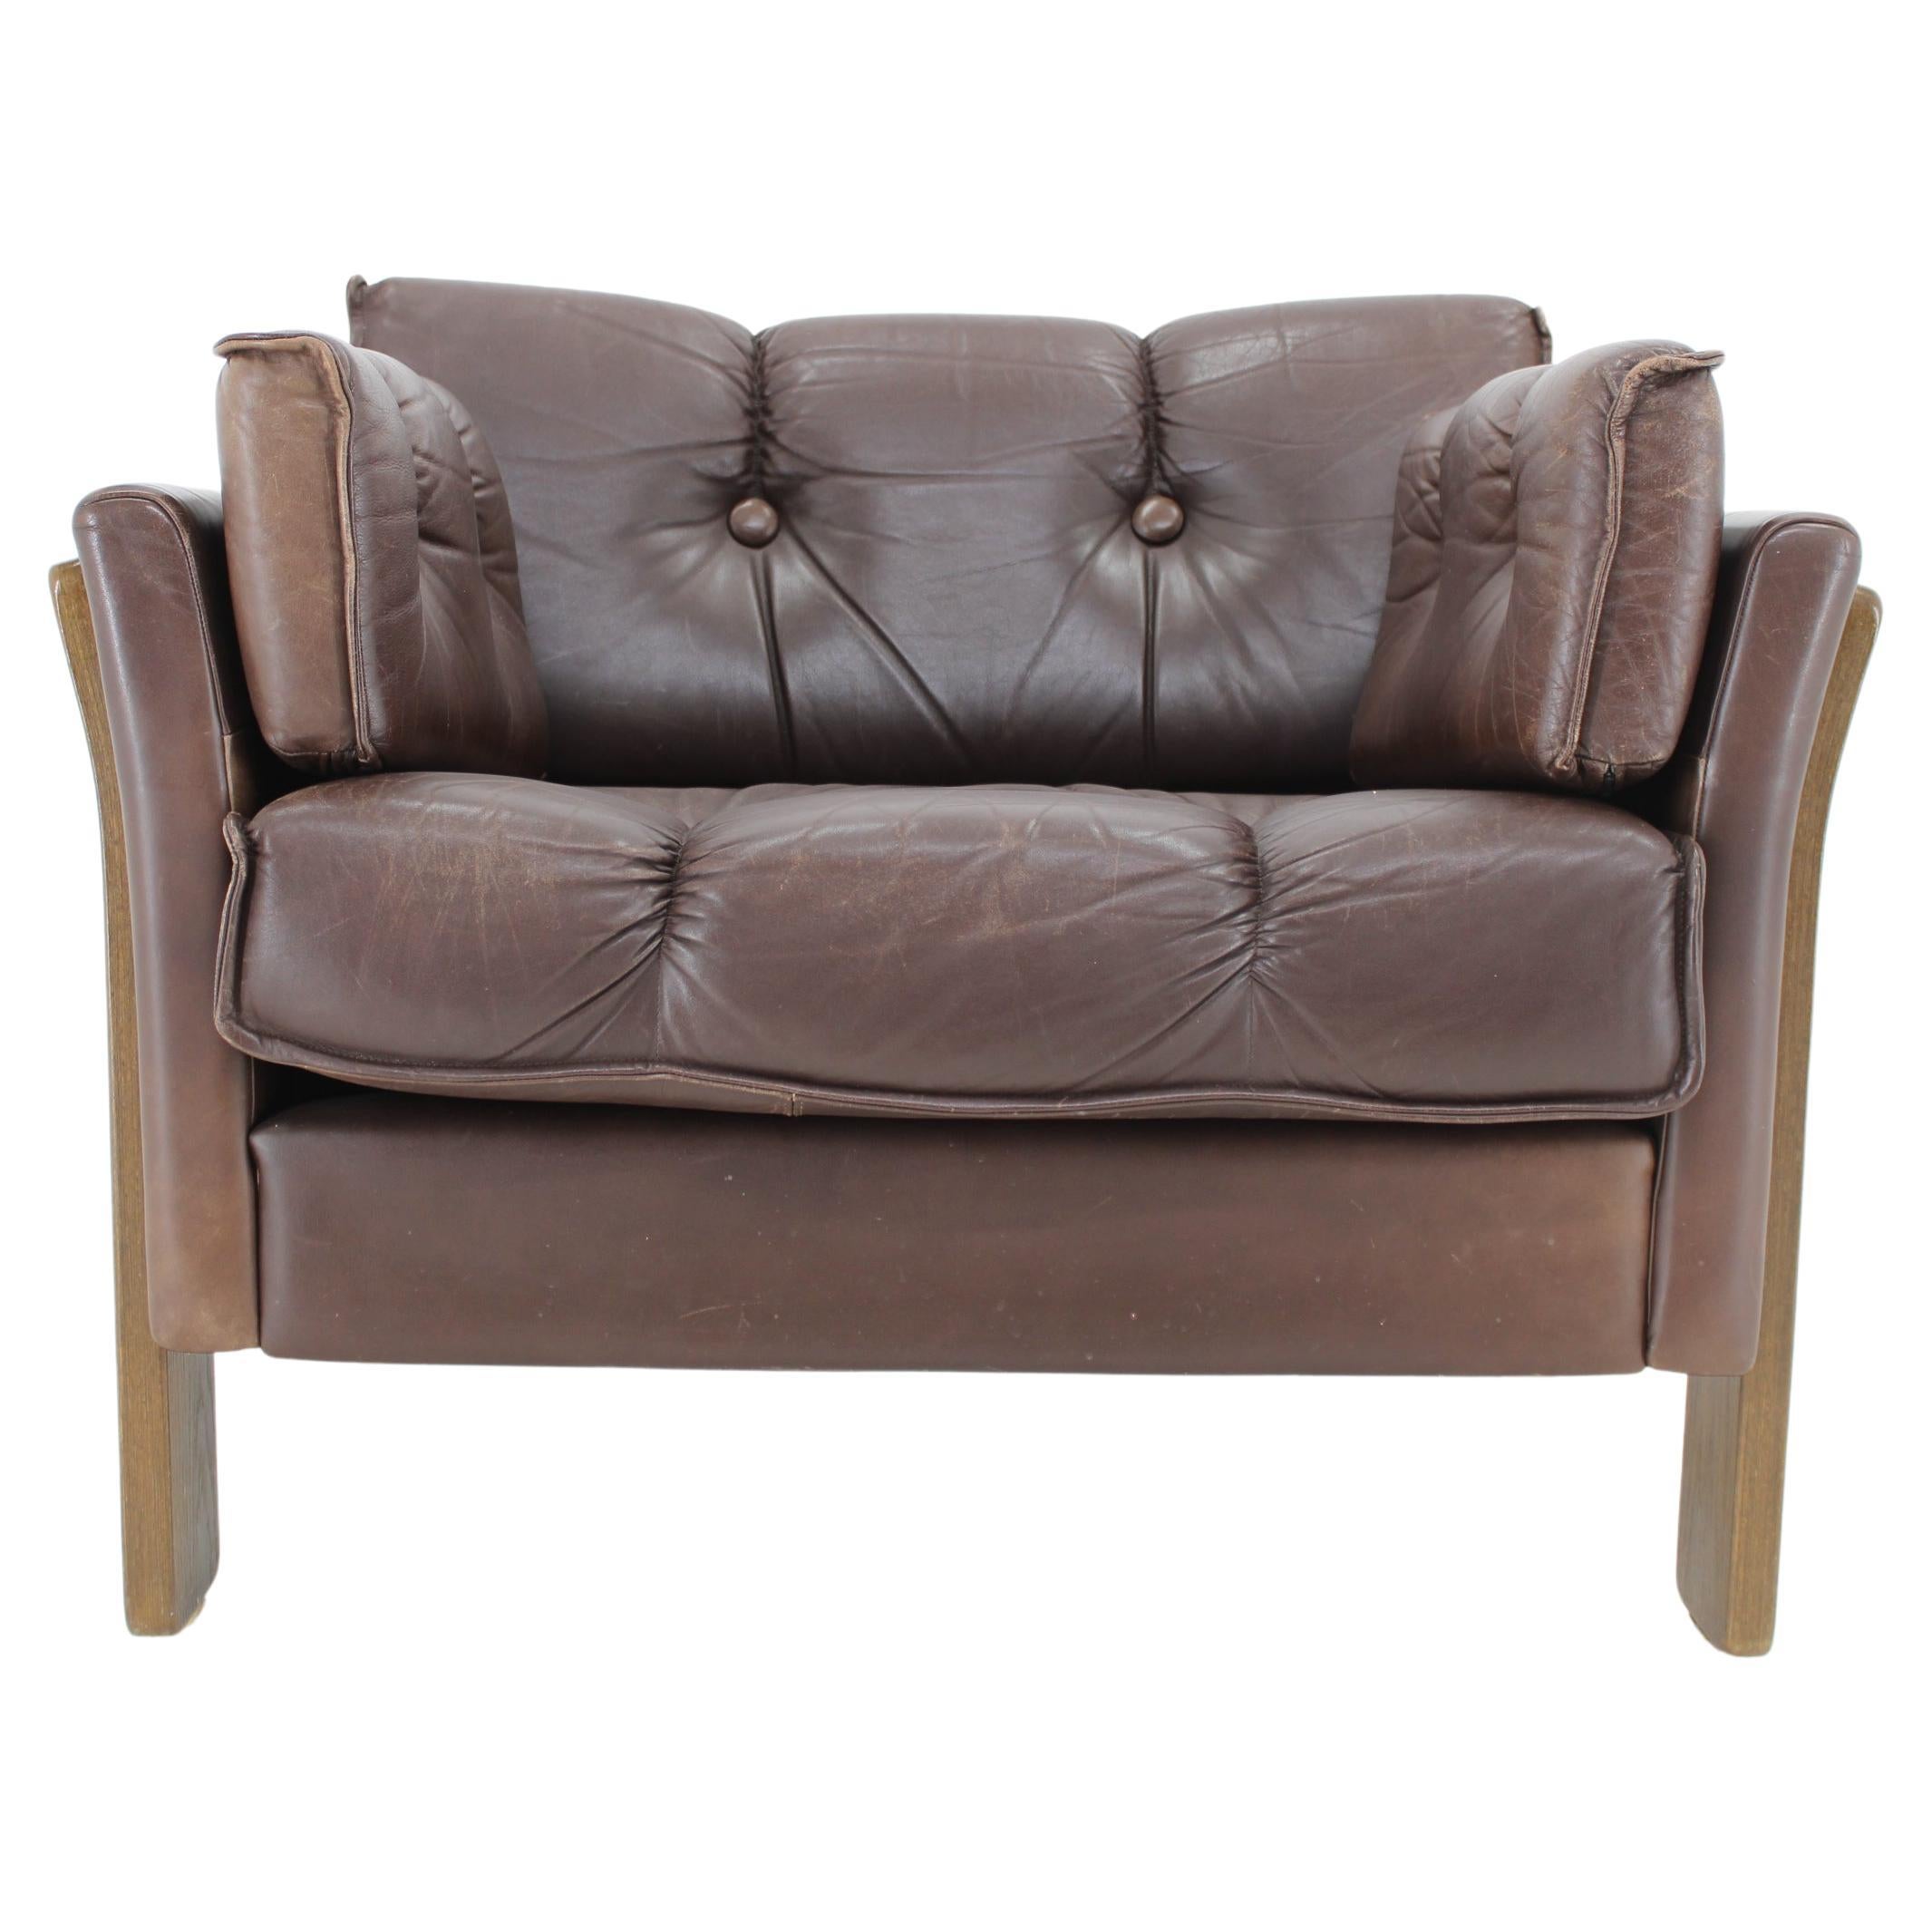 1970s Brown Leather 3-Seater Sofa, Denmark  For Sale